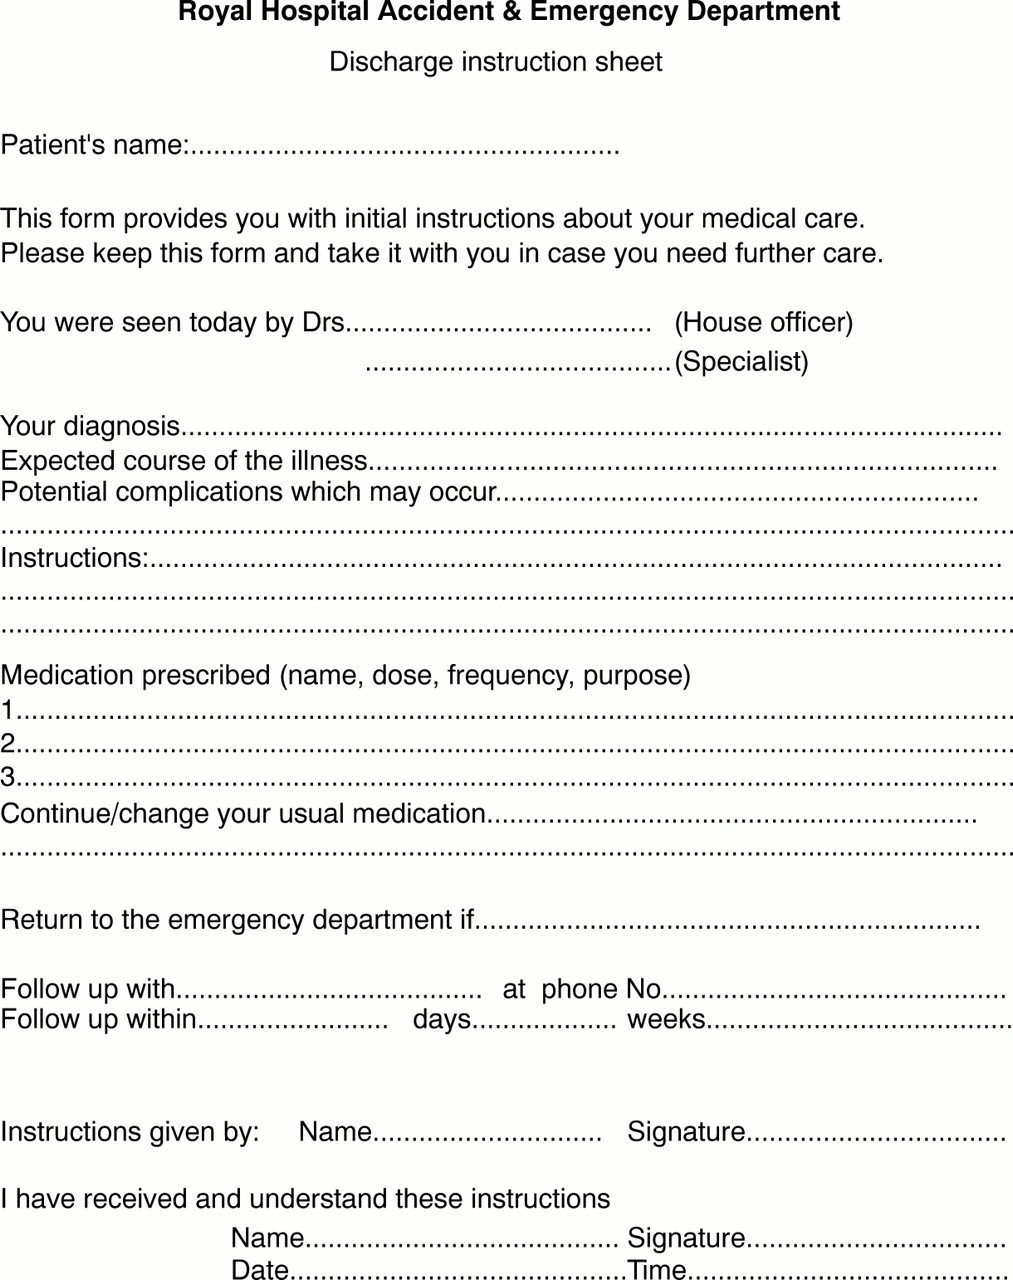 Emergency Room Discharge Papers Template Discharge Instructions for Emergency Department Patients